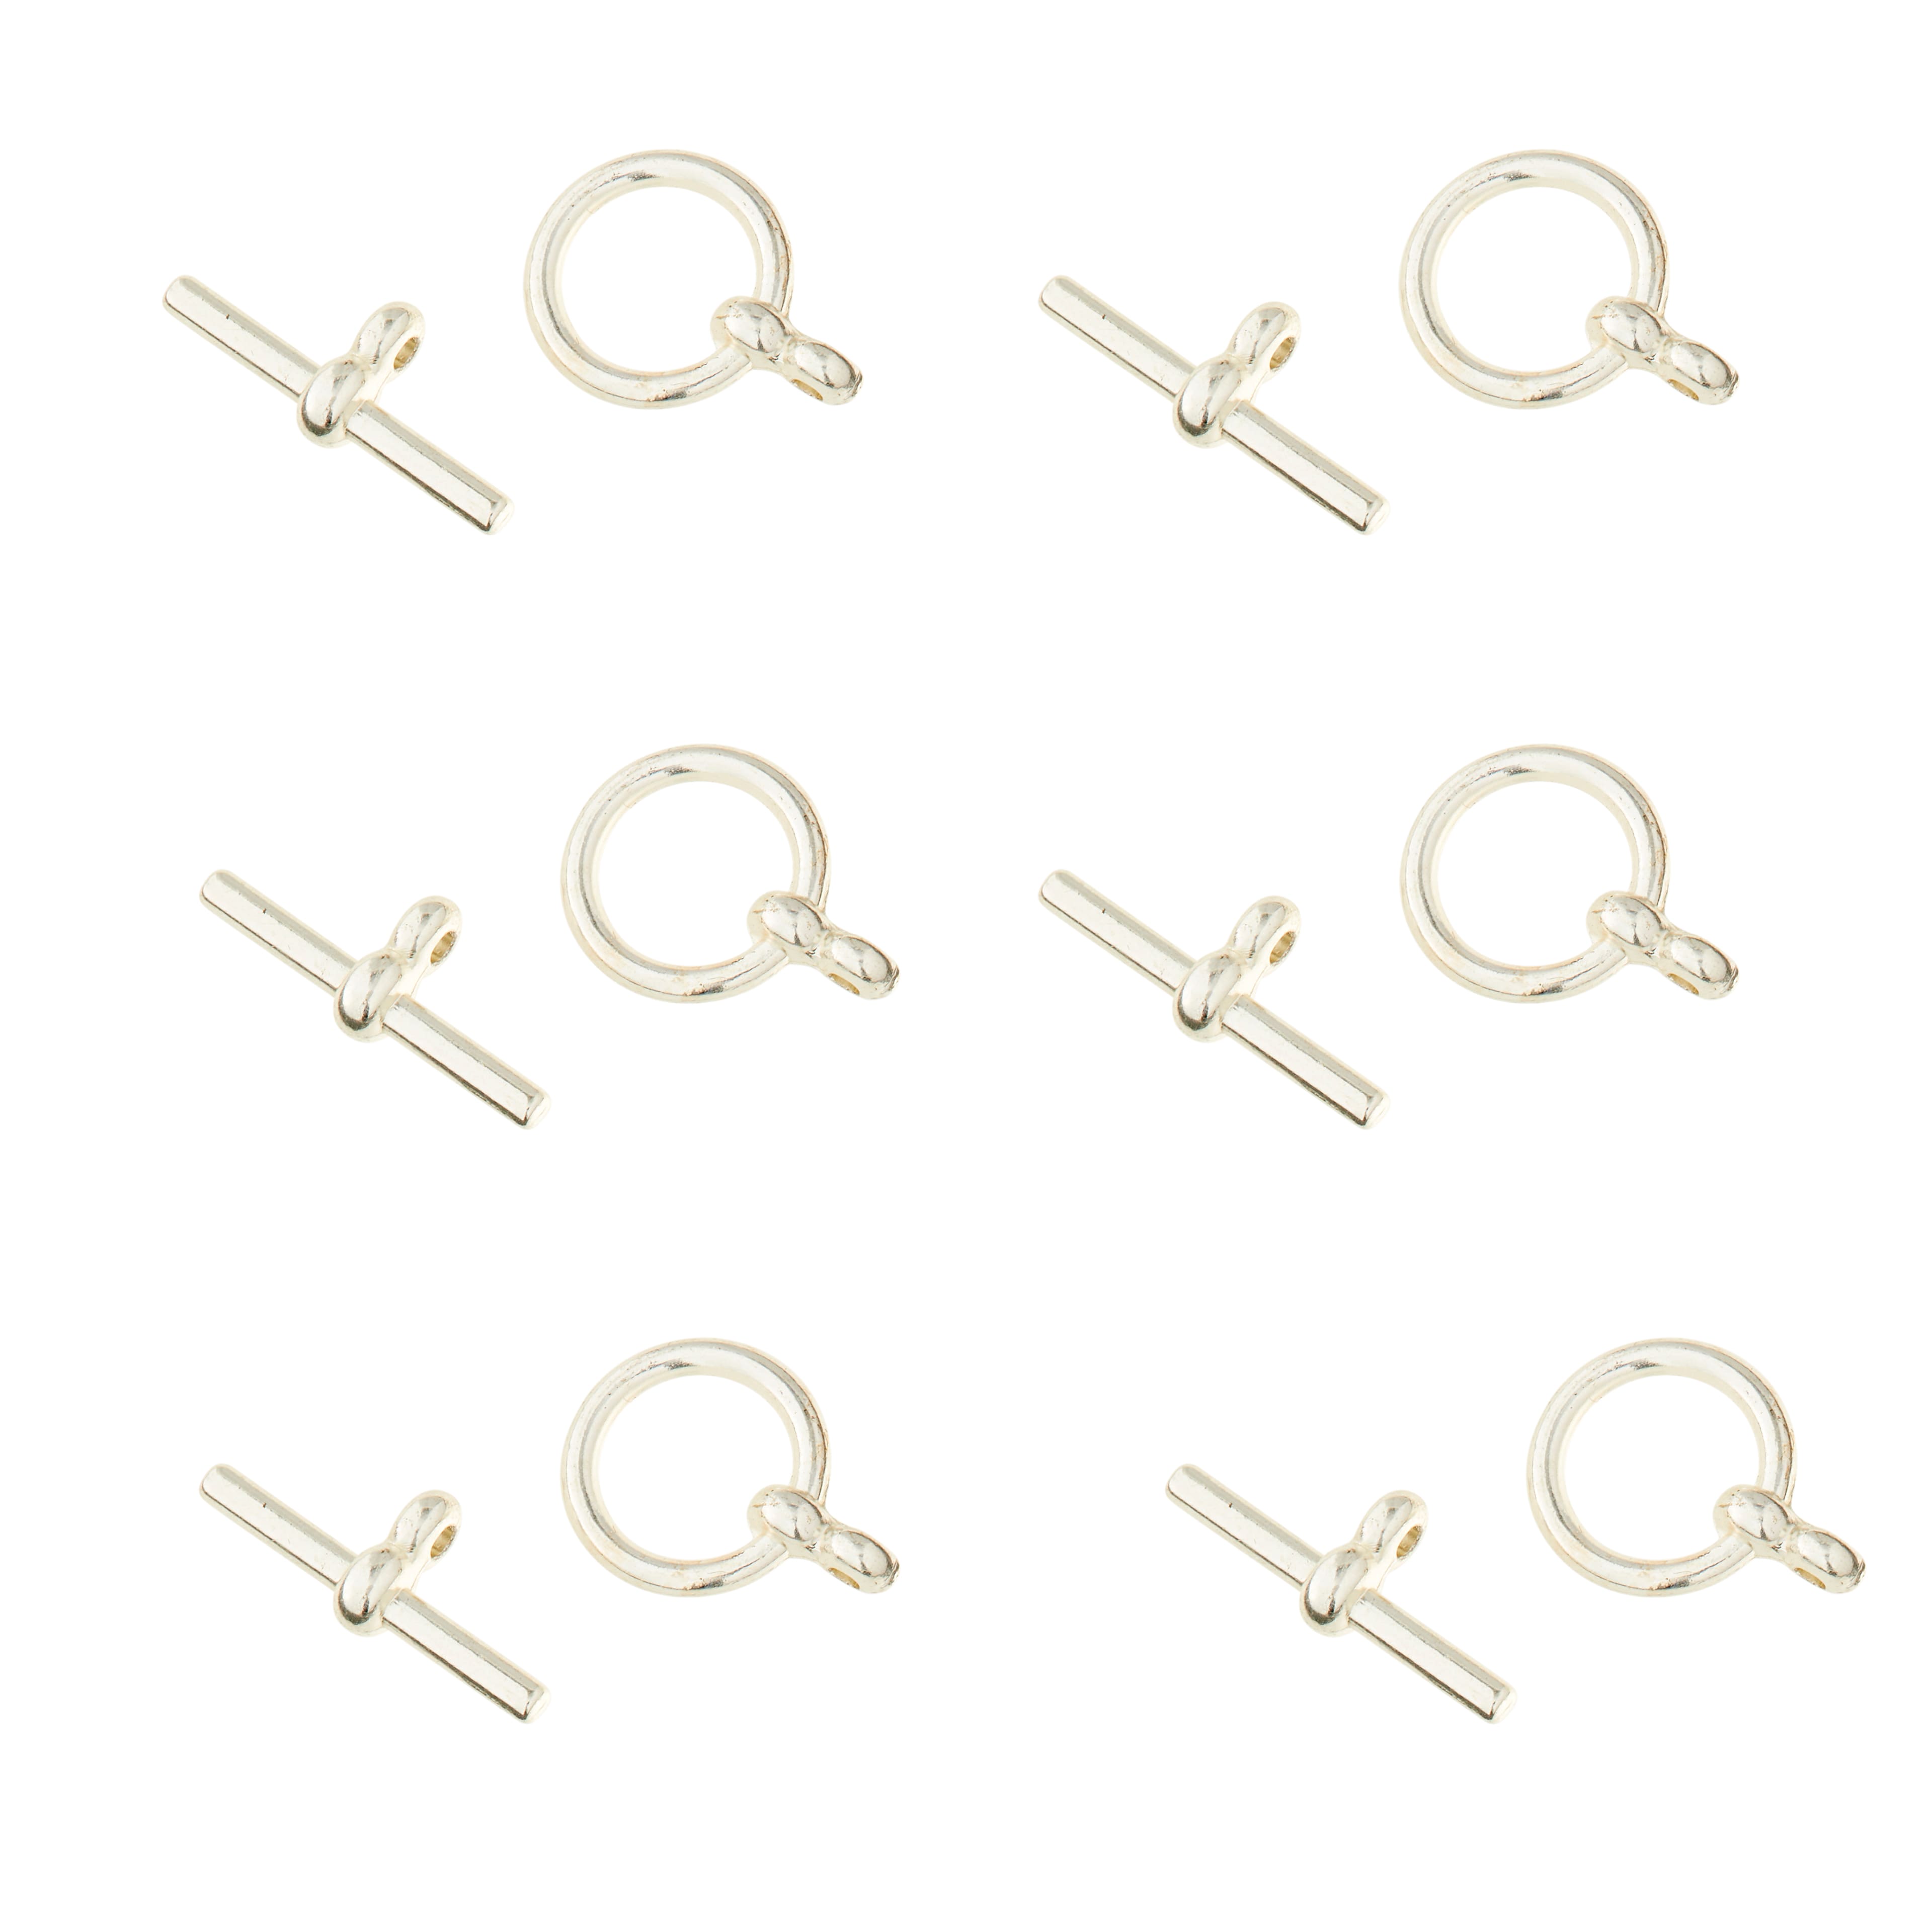 TOGGLE CLASP-Round 15mm -Gold Plated